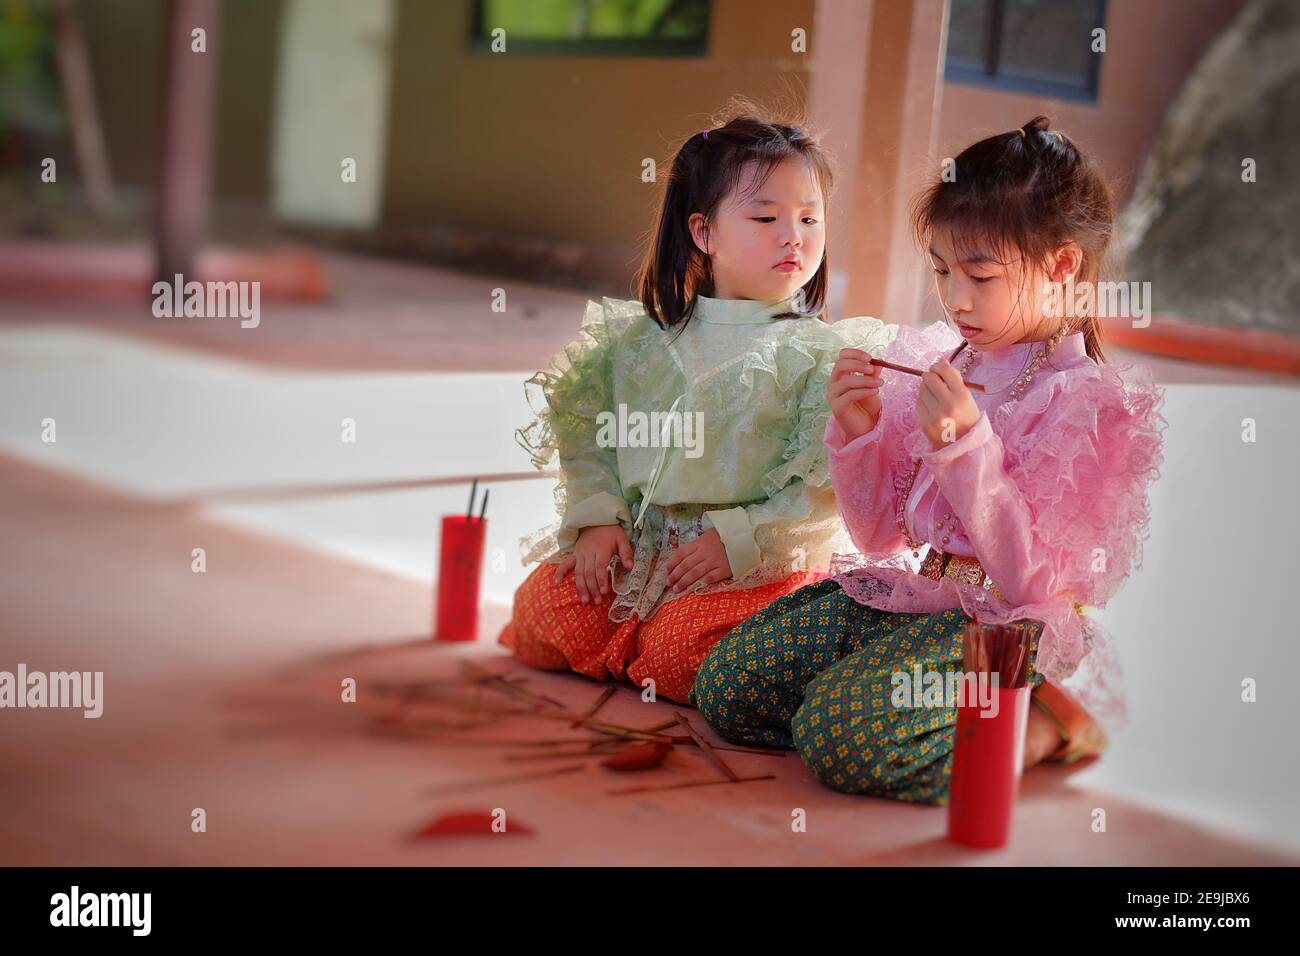 Cute young Asian girls in traditional Thai costumes are shaking chi-chi sticks, also known as Kau chim  or Kau cim sticks during a festive Thai new ye Stock Photo